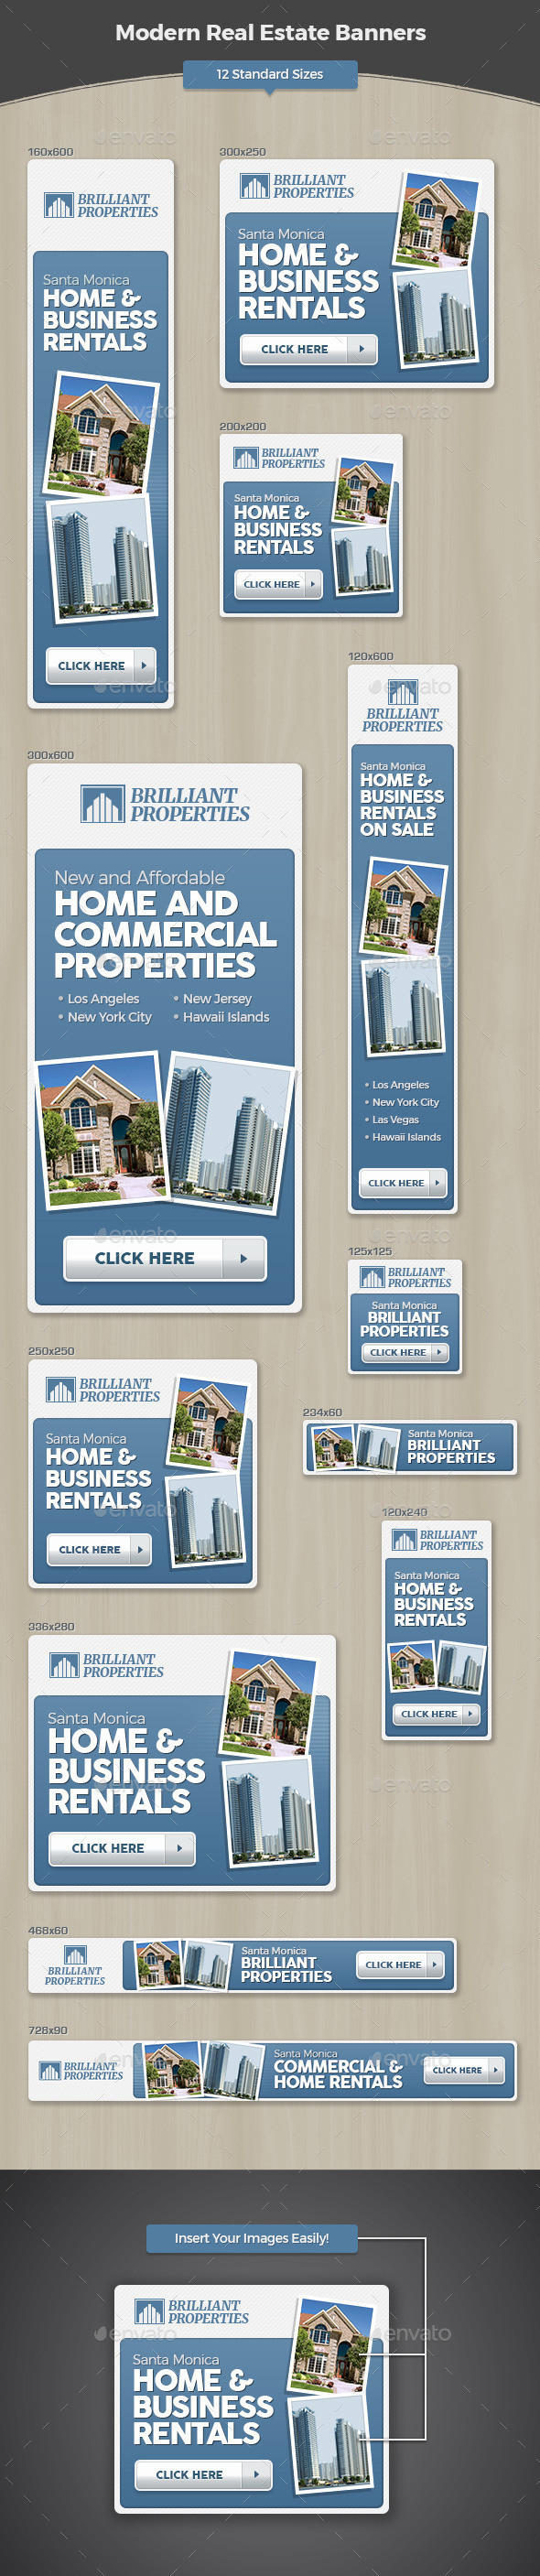 Modern real estate banners preview